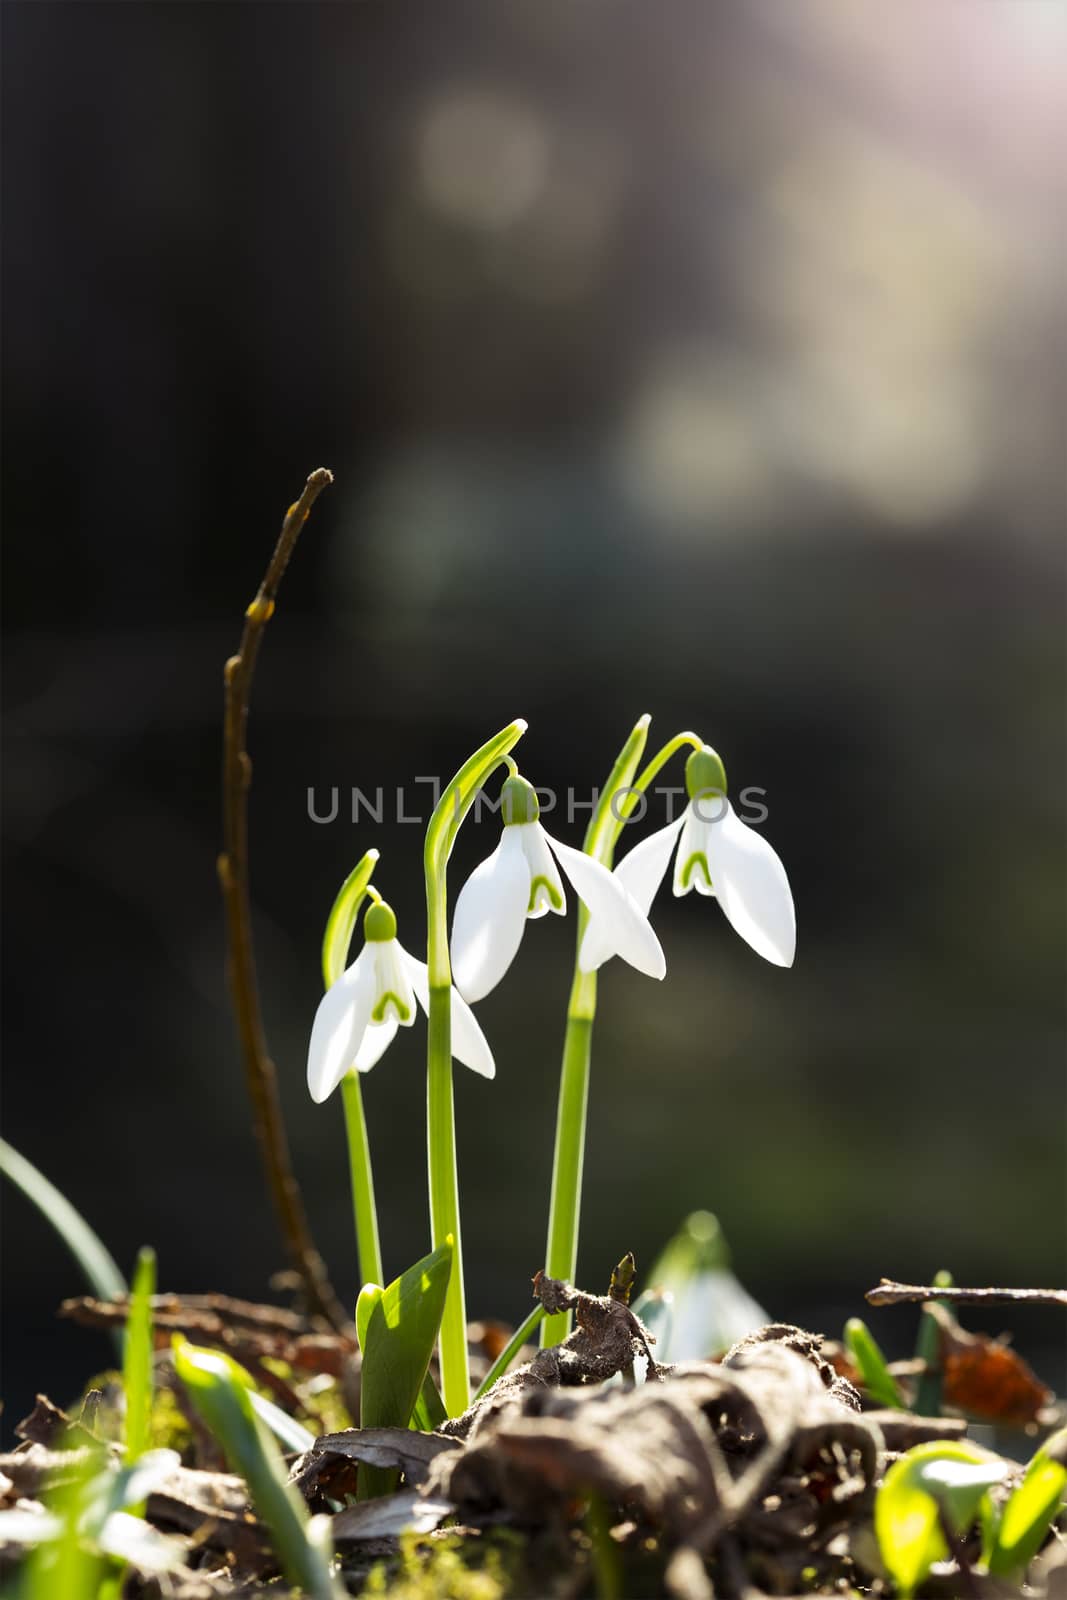 Three snowdrops by photosampler